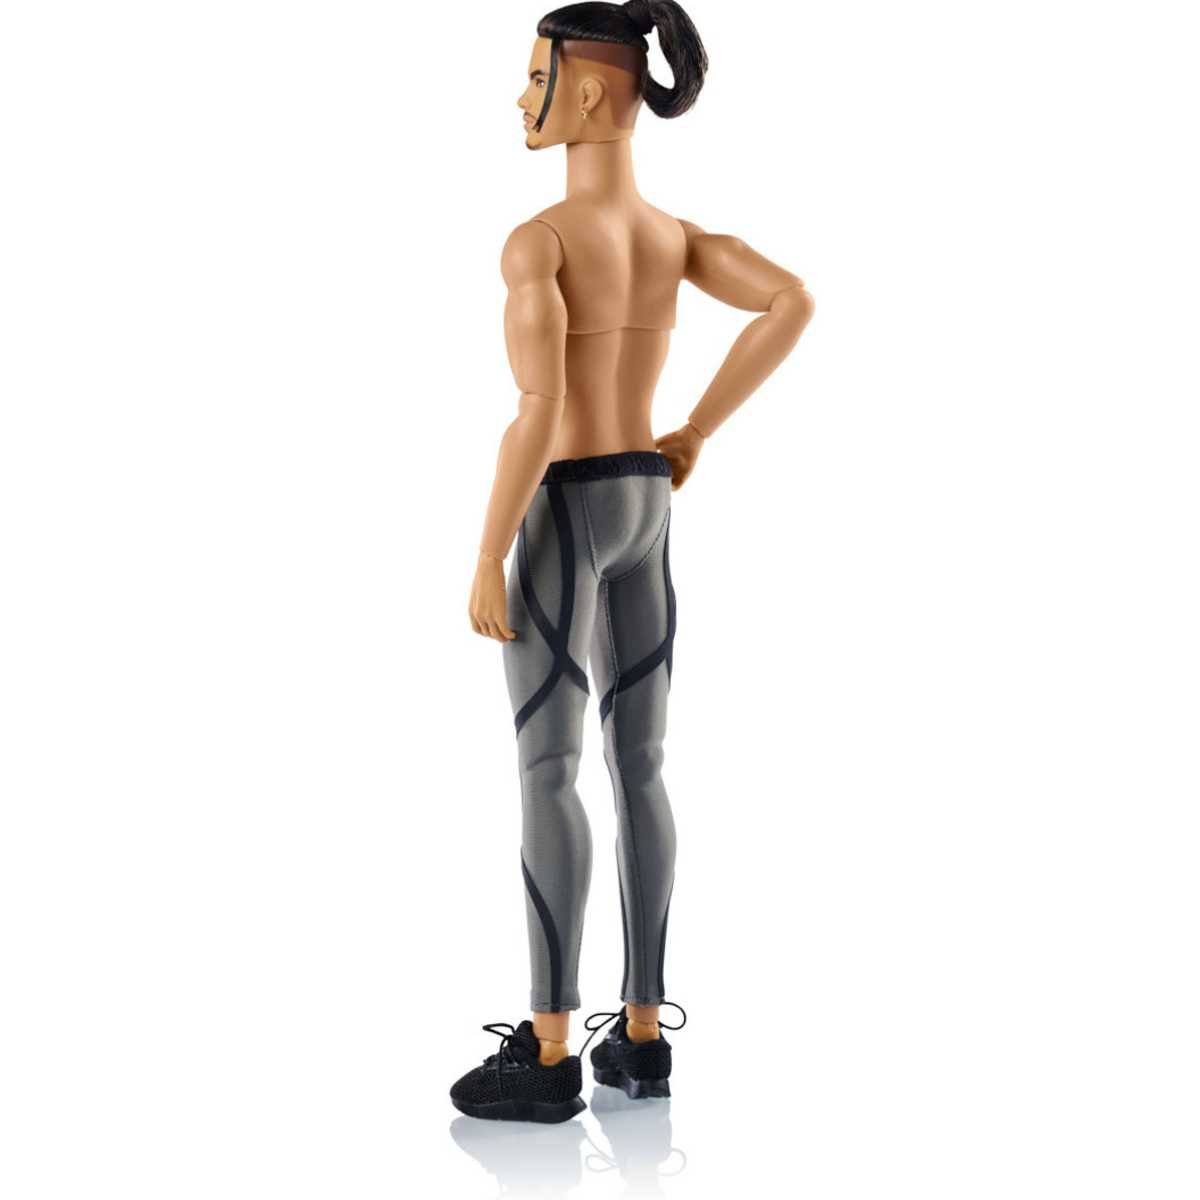 Integrity Toys Power Workout Tenzin Dahkling Basic Doll The Monarchs HOMME Collection - Simon's Collectibles